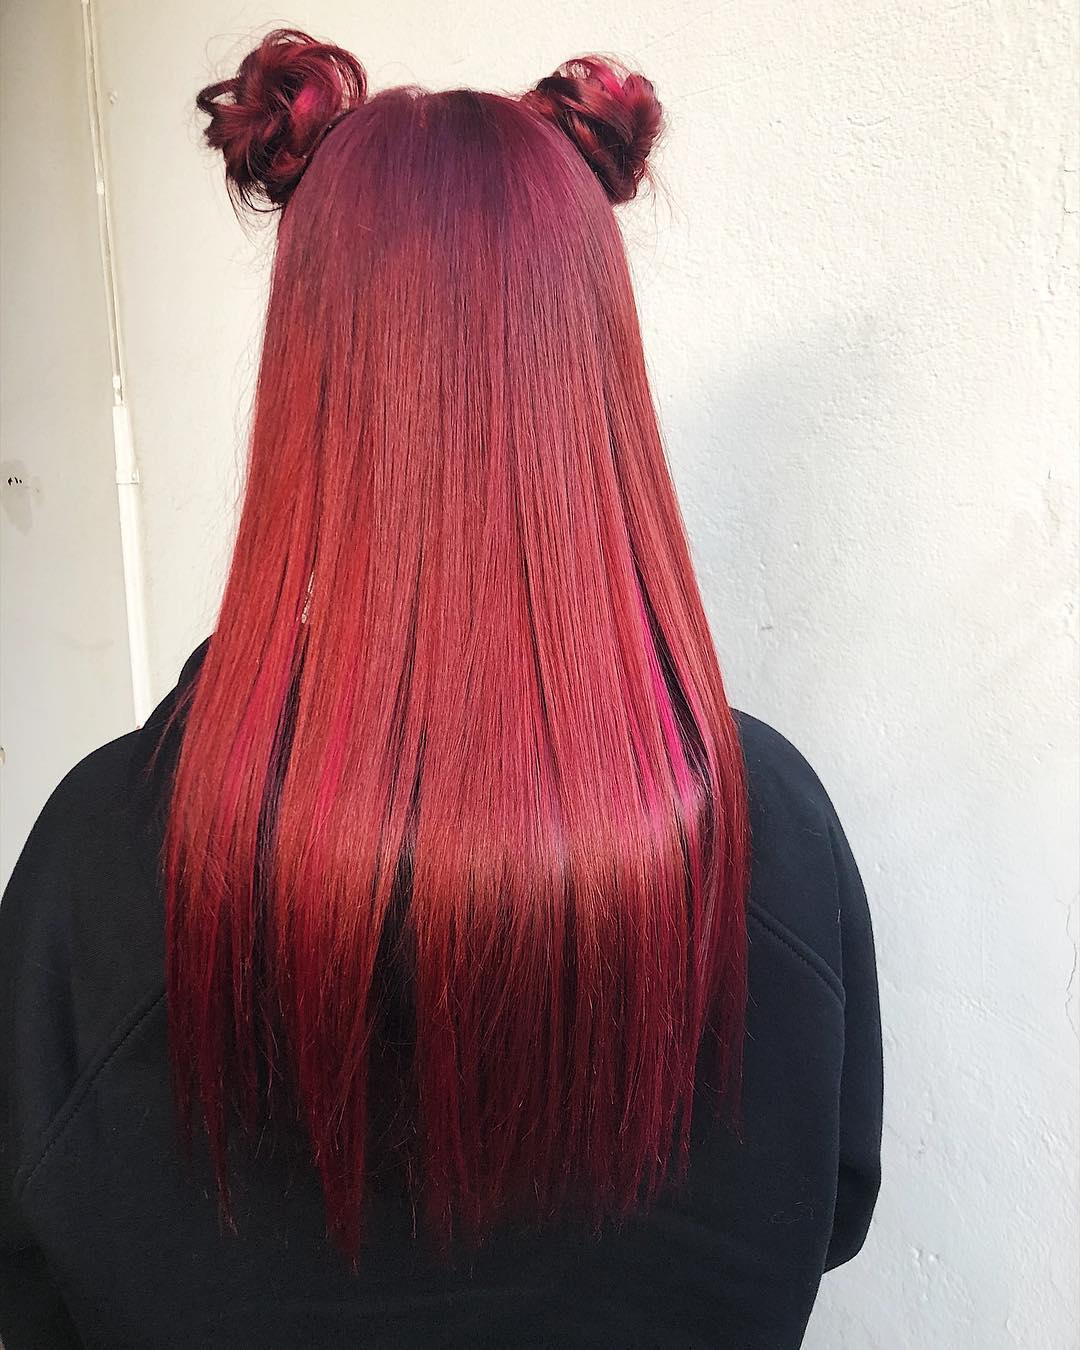 Hot Red Hair With Space Buns